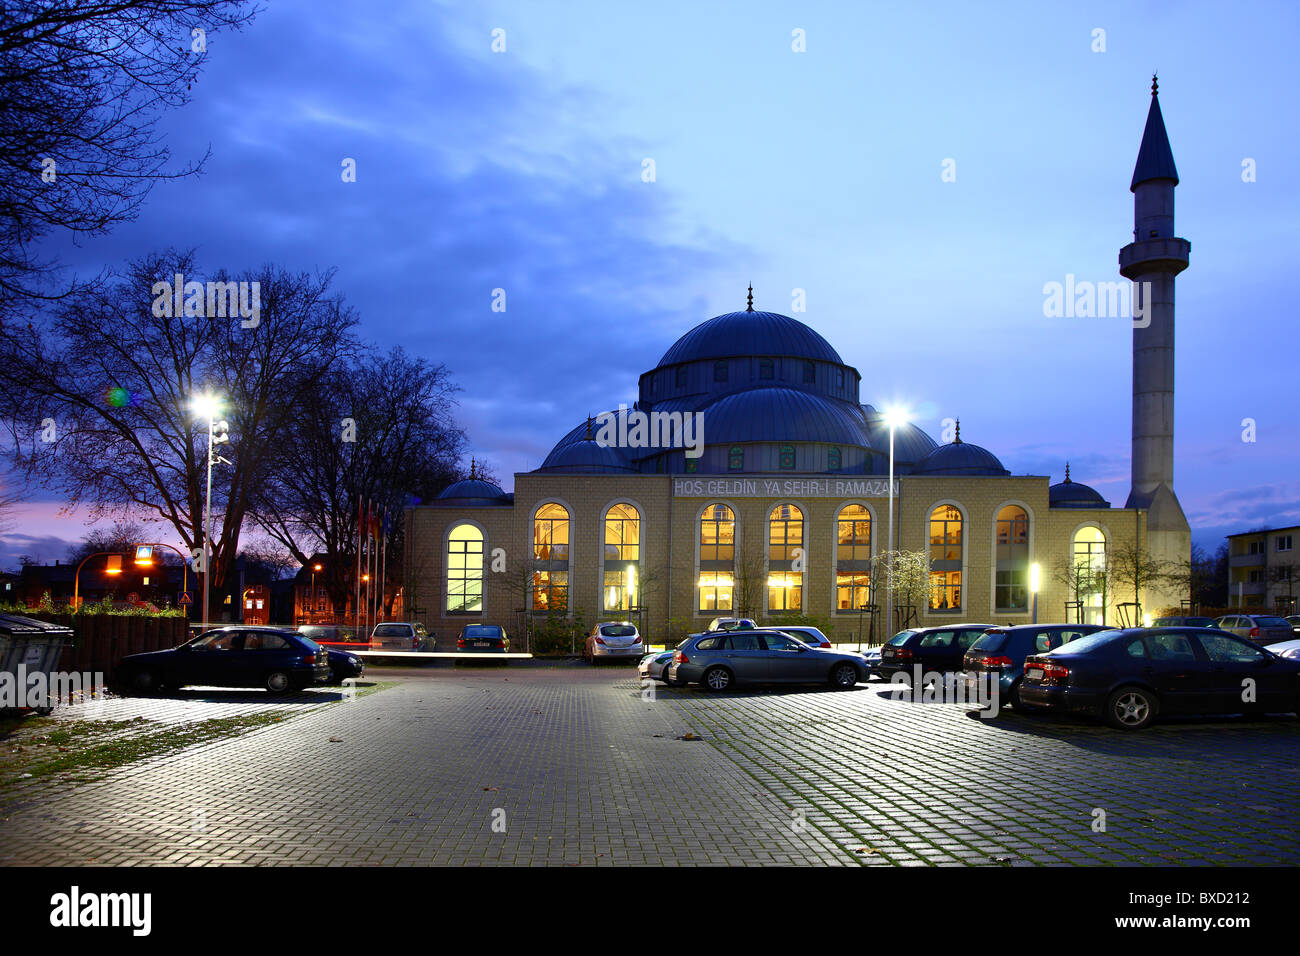 DITIB-Merkez mosque in Duisburg, Ruhr area, Germany. Biggest mosque in Germany. Run by the Turkish DITIB organization. Stock Photo